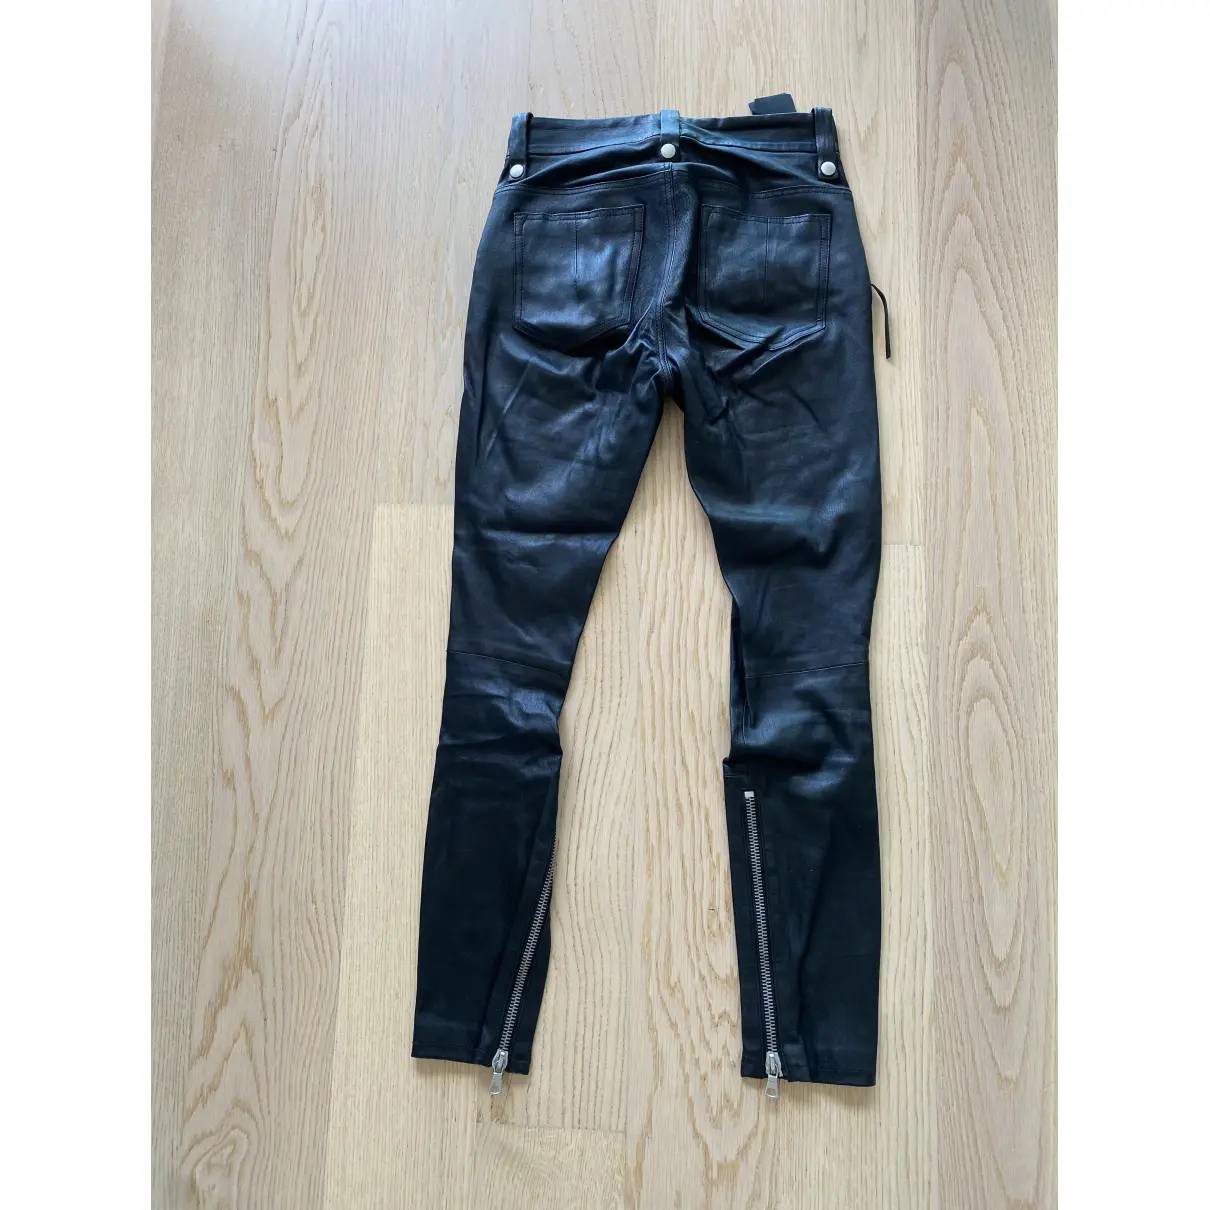 Buy Unravel Project Leather trousers online